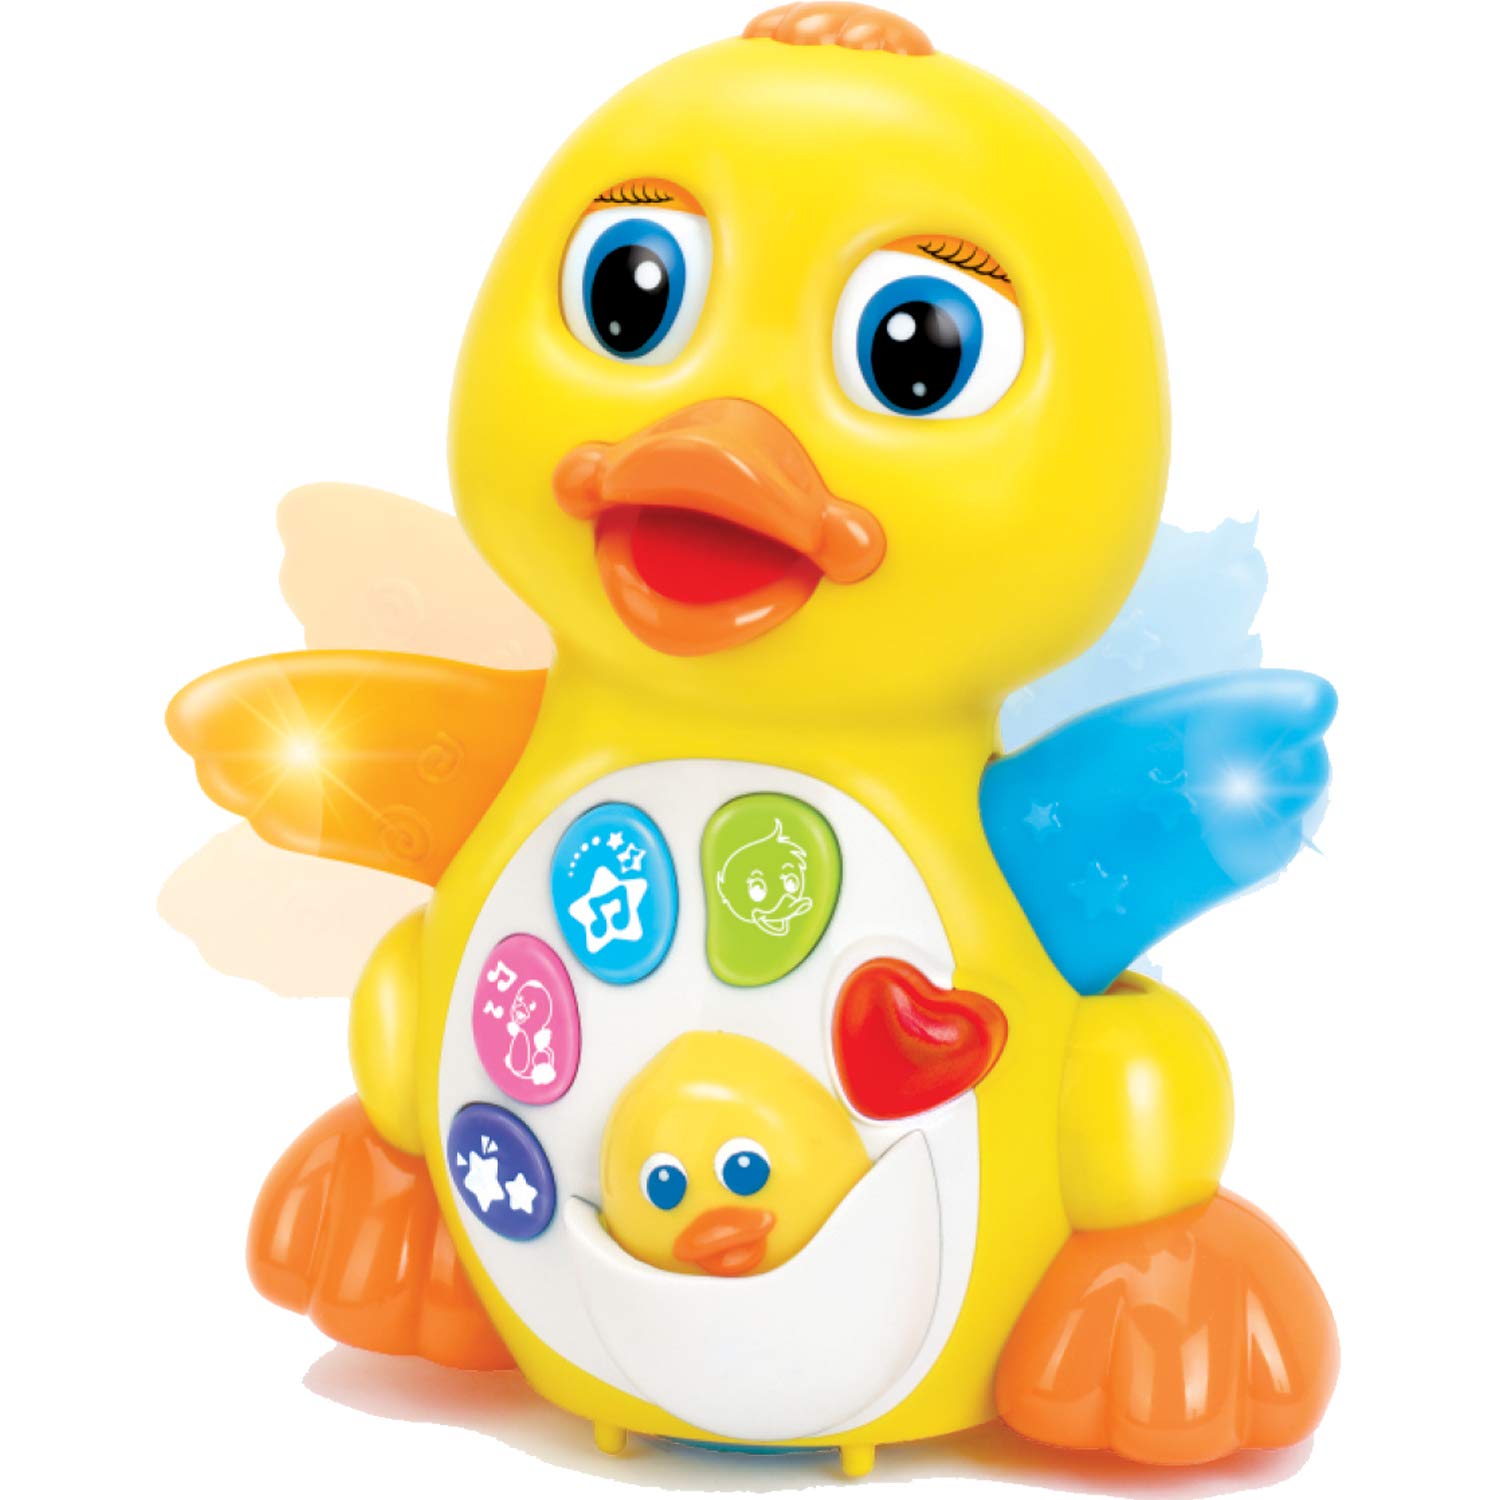 JOYIN Baby Musical Toy Dancing Walking Yellow Duck Baby Toy with Music and LED Lights, Infant Light Up Toys, Activity Center for Toddlers, Baby Learning Development Toy